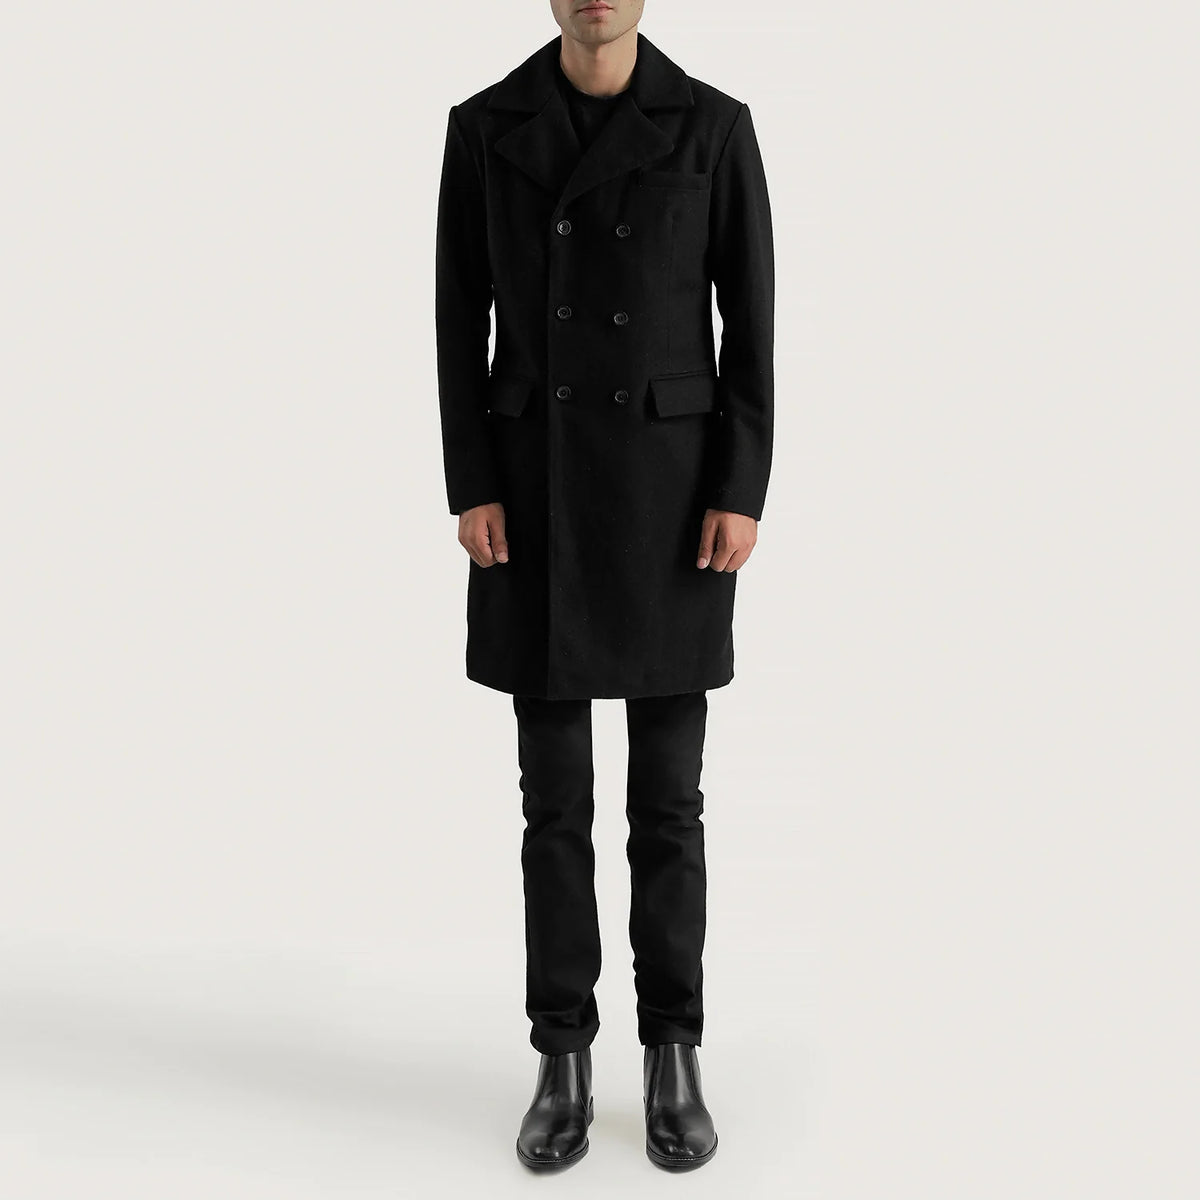 Claud Black Wool Double Breasted Coat